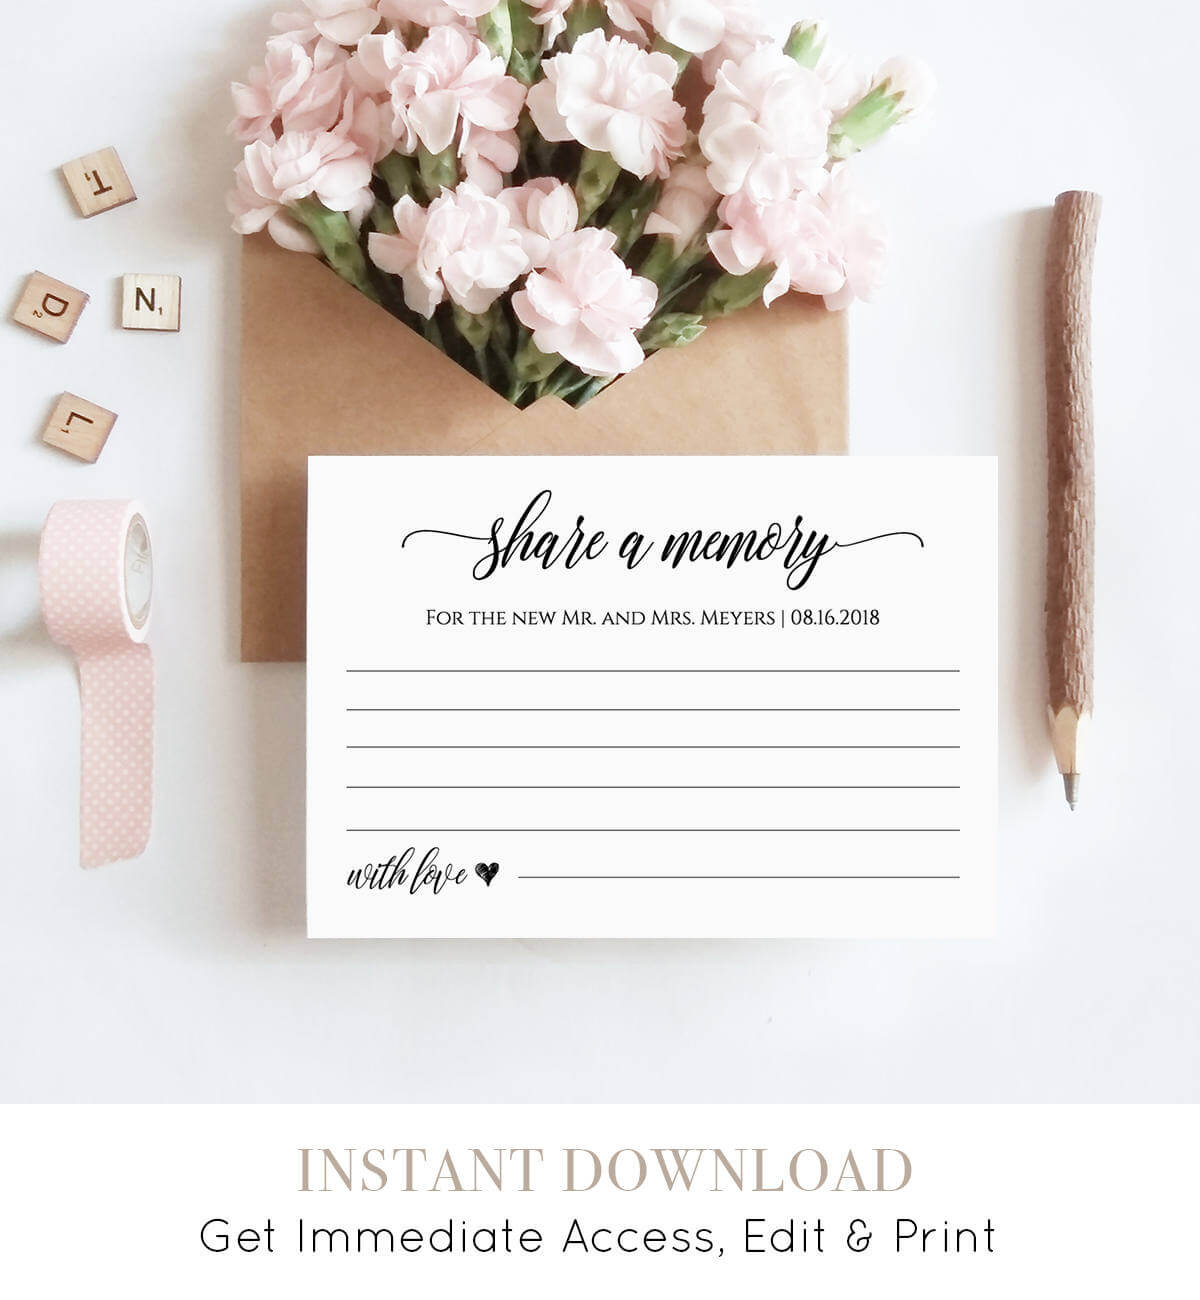 Share A Memory Printable Card, Wedding Advice Template For Inside In Memory Cards Templates